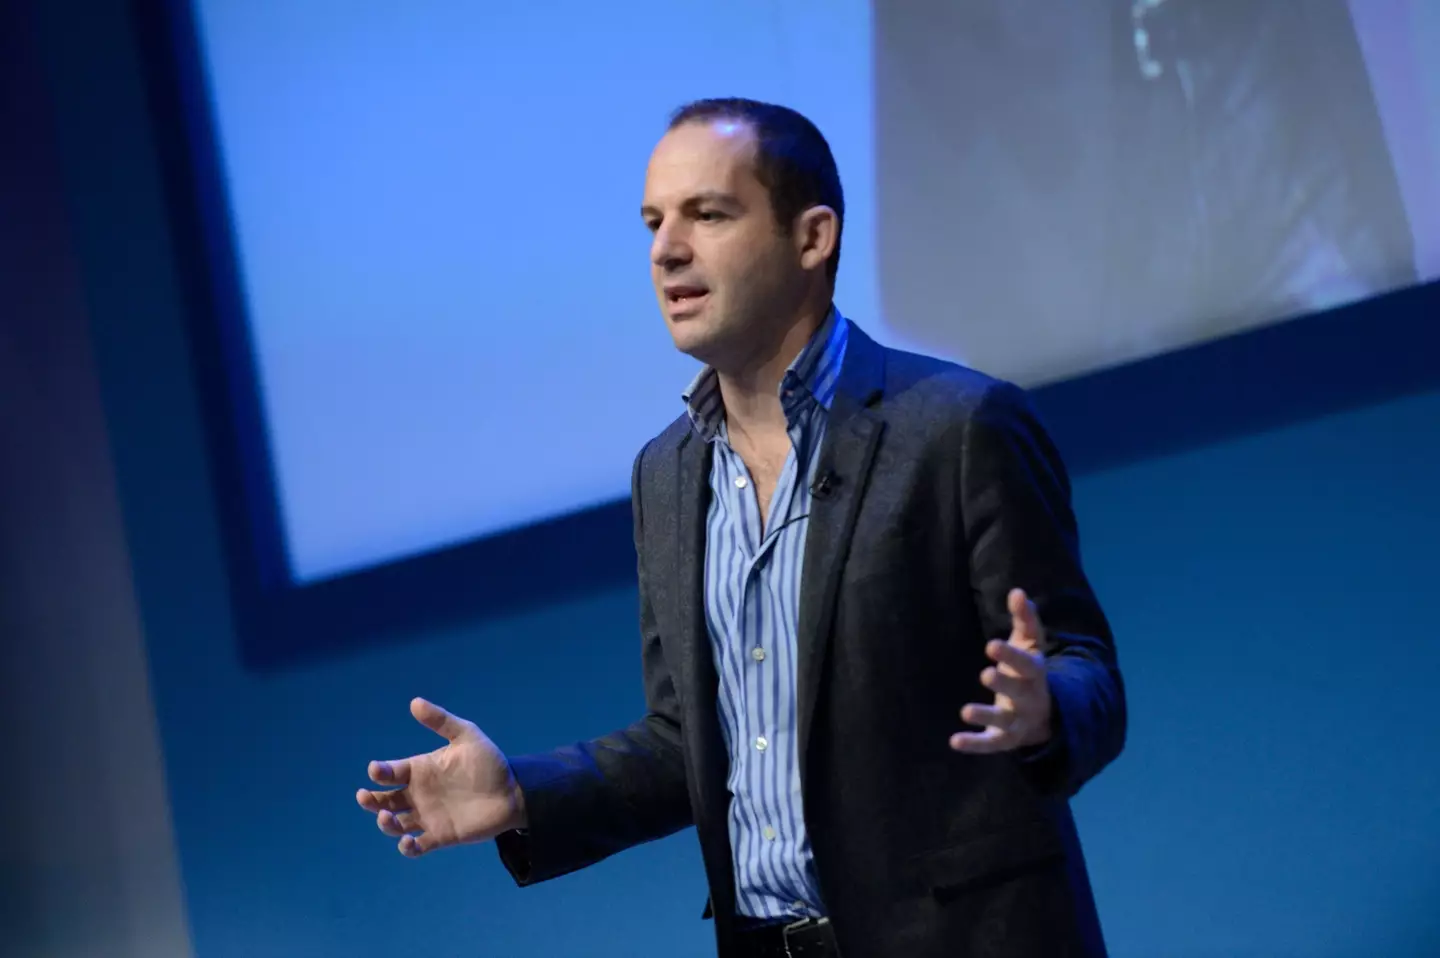 Martin Lewis, the Money Saving Expert, has listed the ins and outs of a LISA.